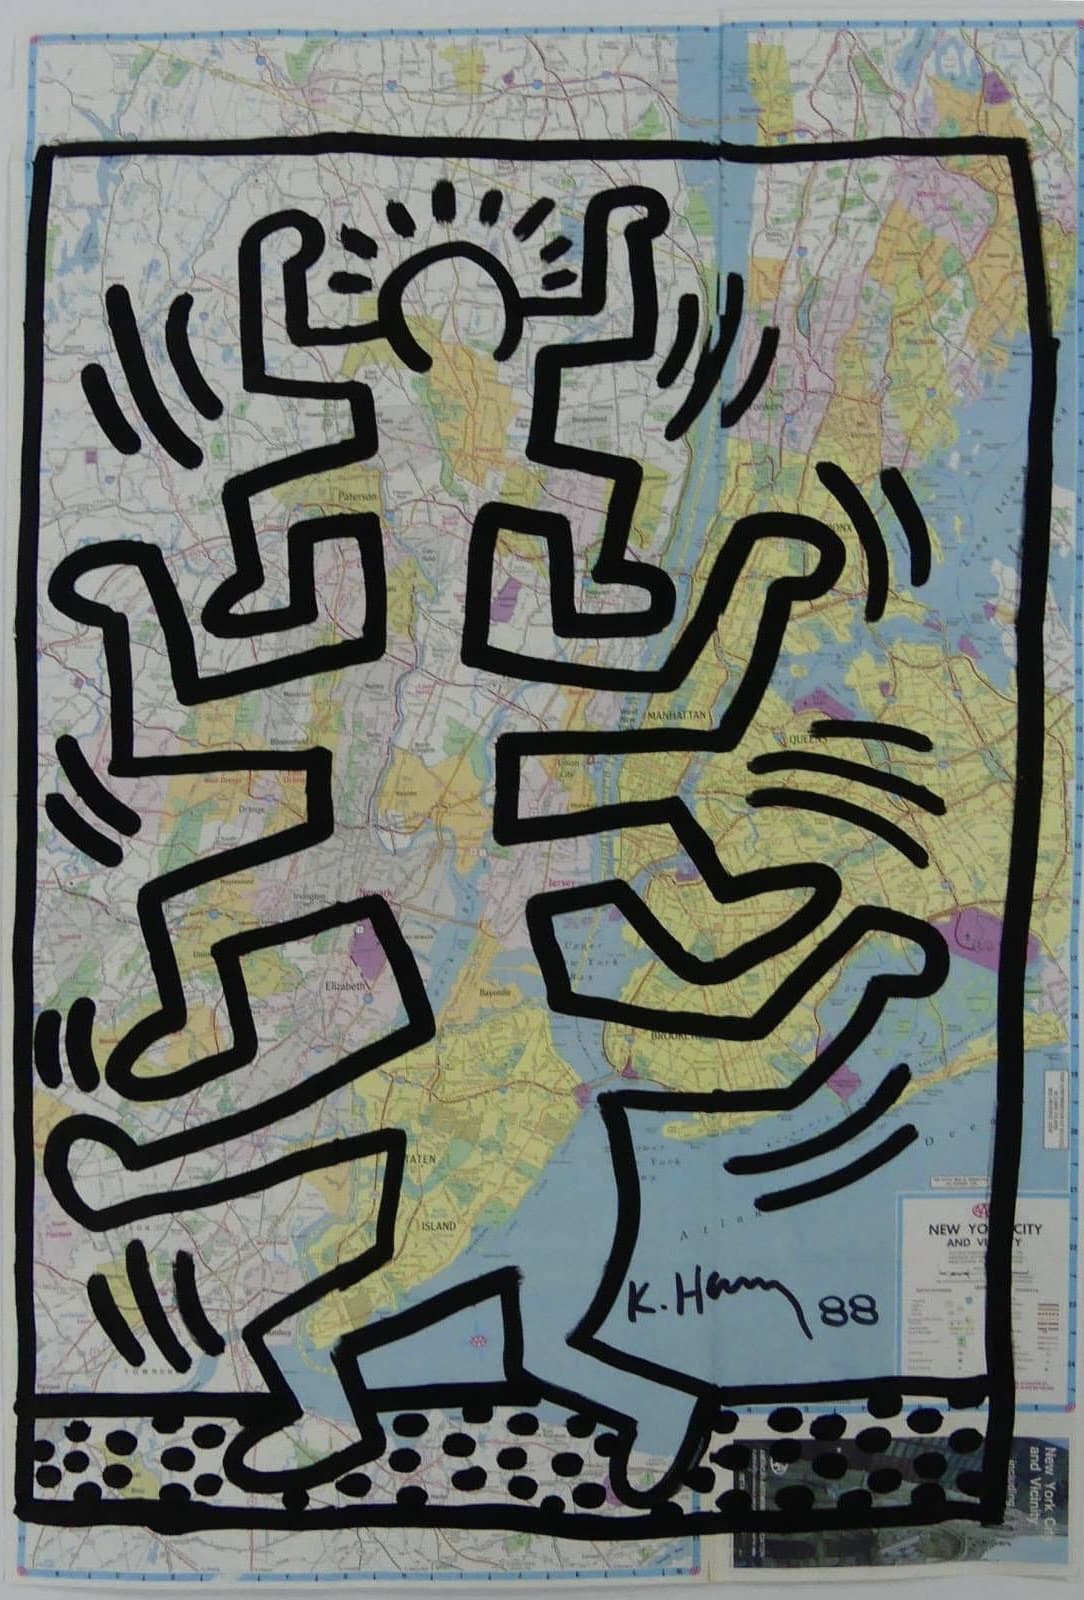 “NEW YORK CITY” By Keith Haring